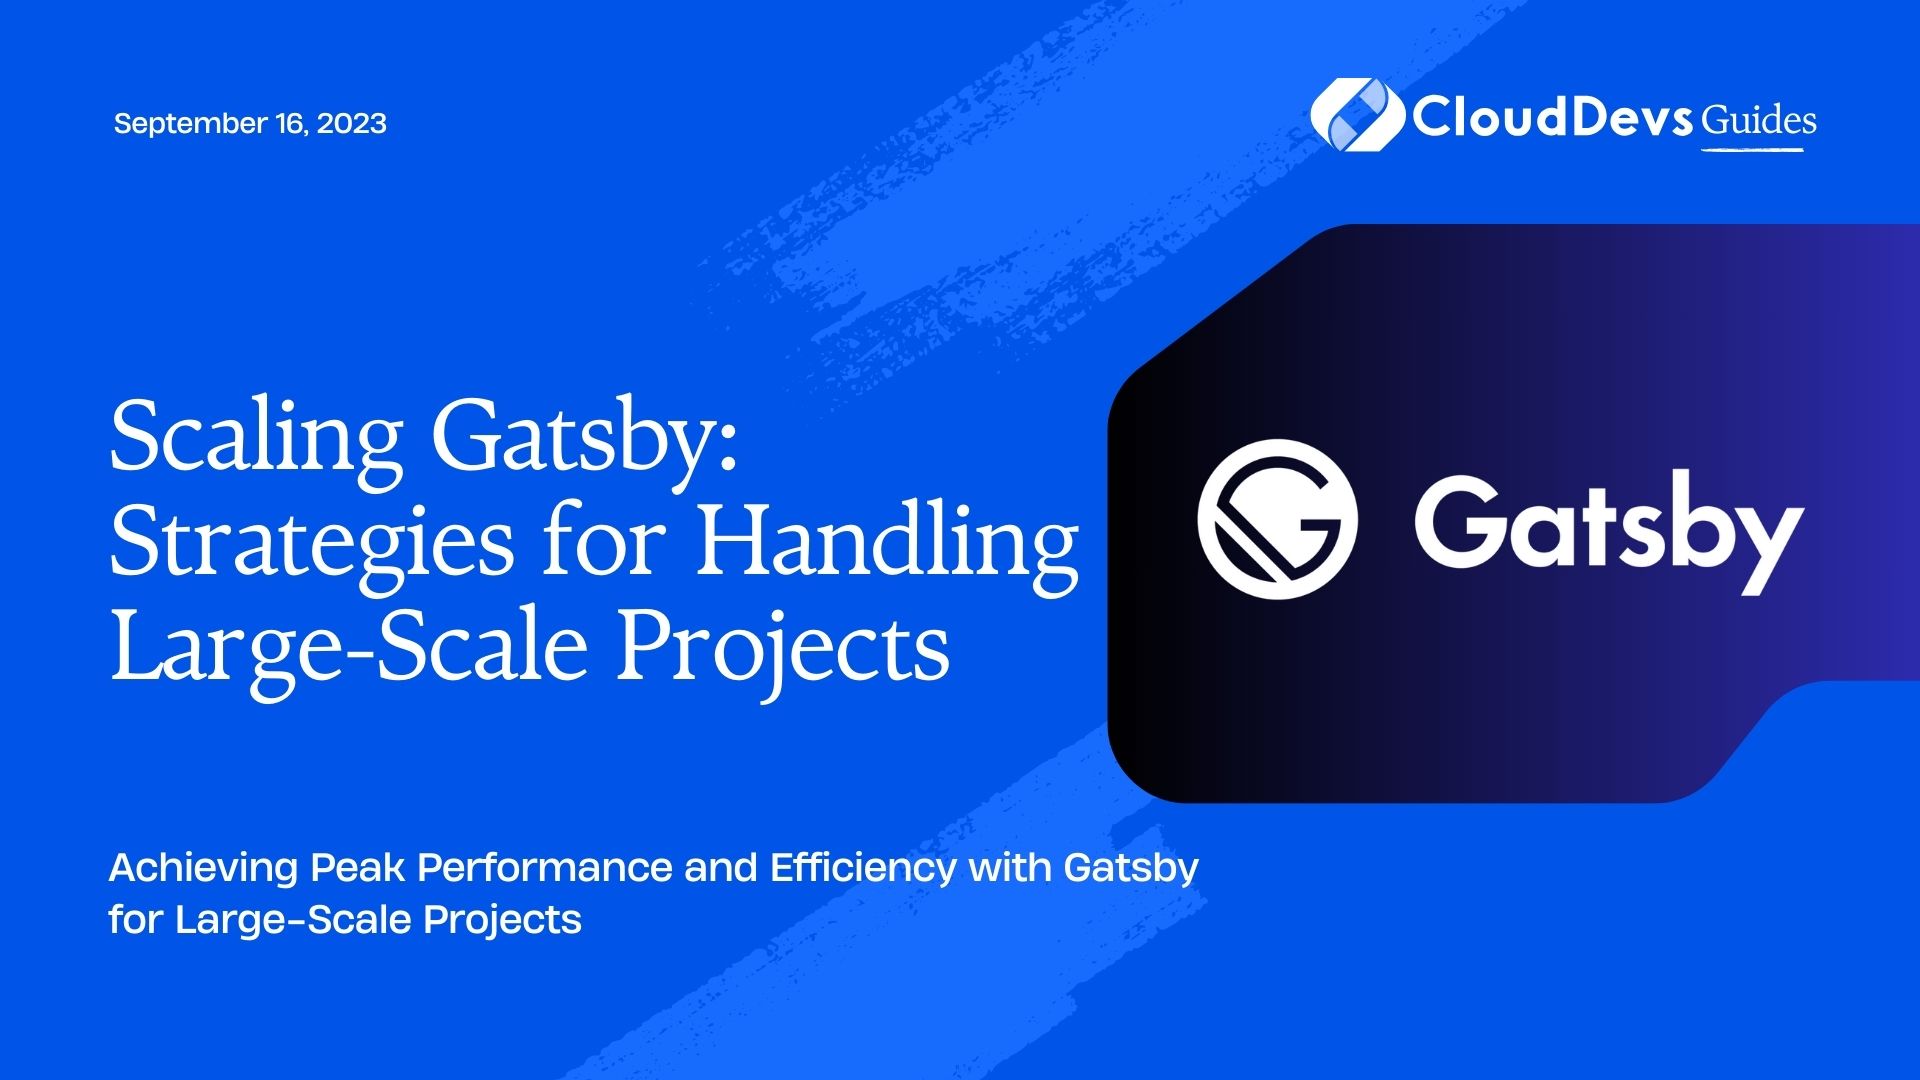 Scaling Gatsby: Strategies for Handling Large-Scale Projects